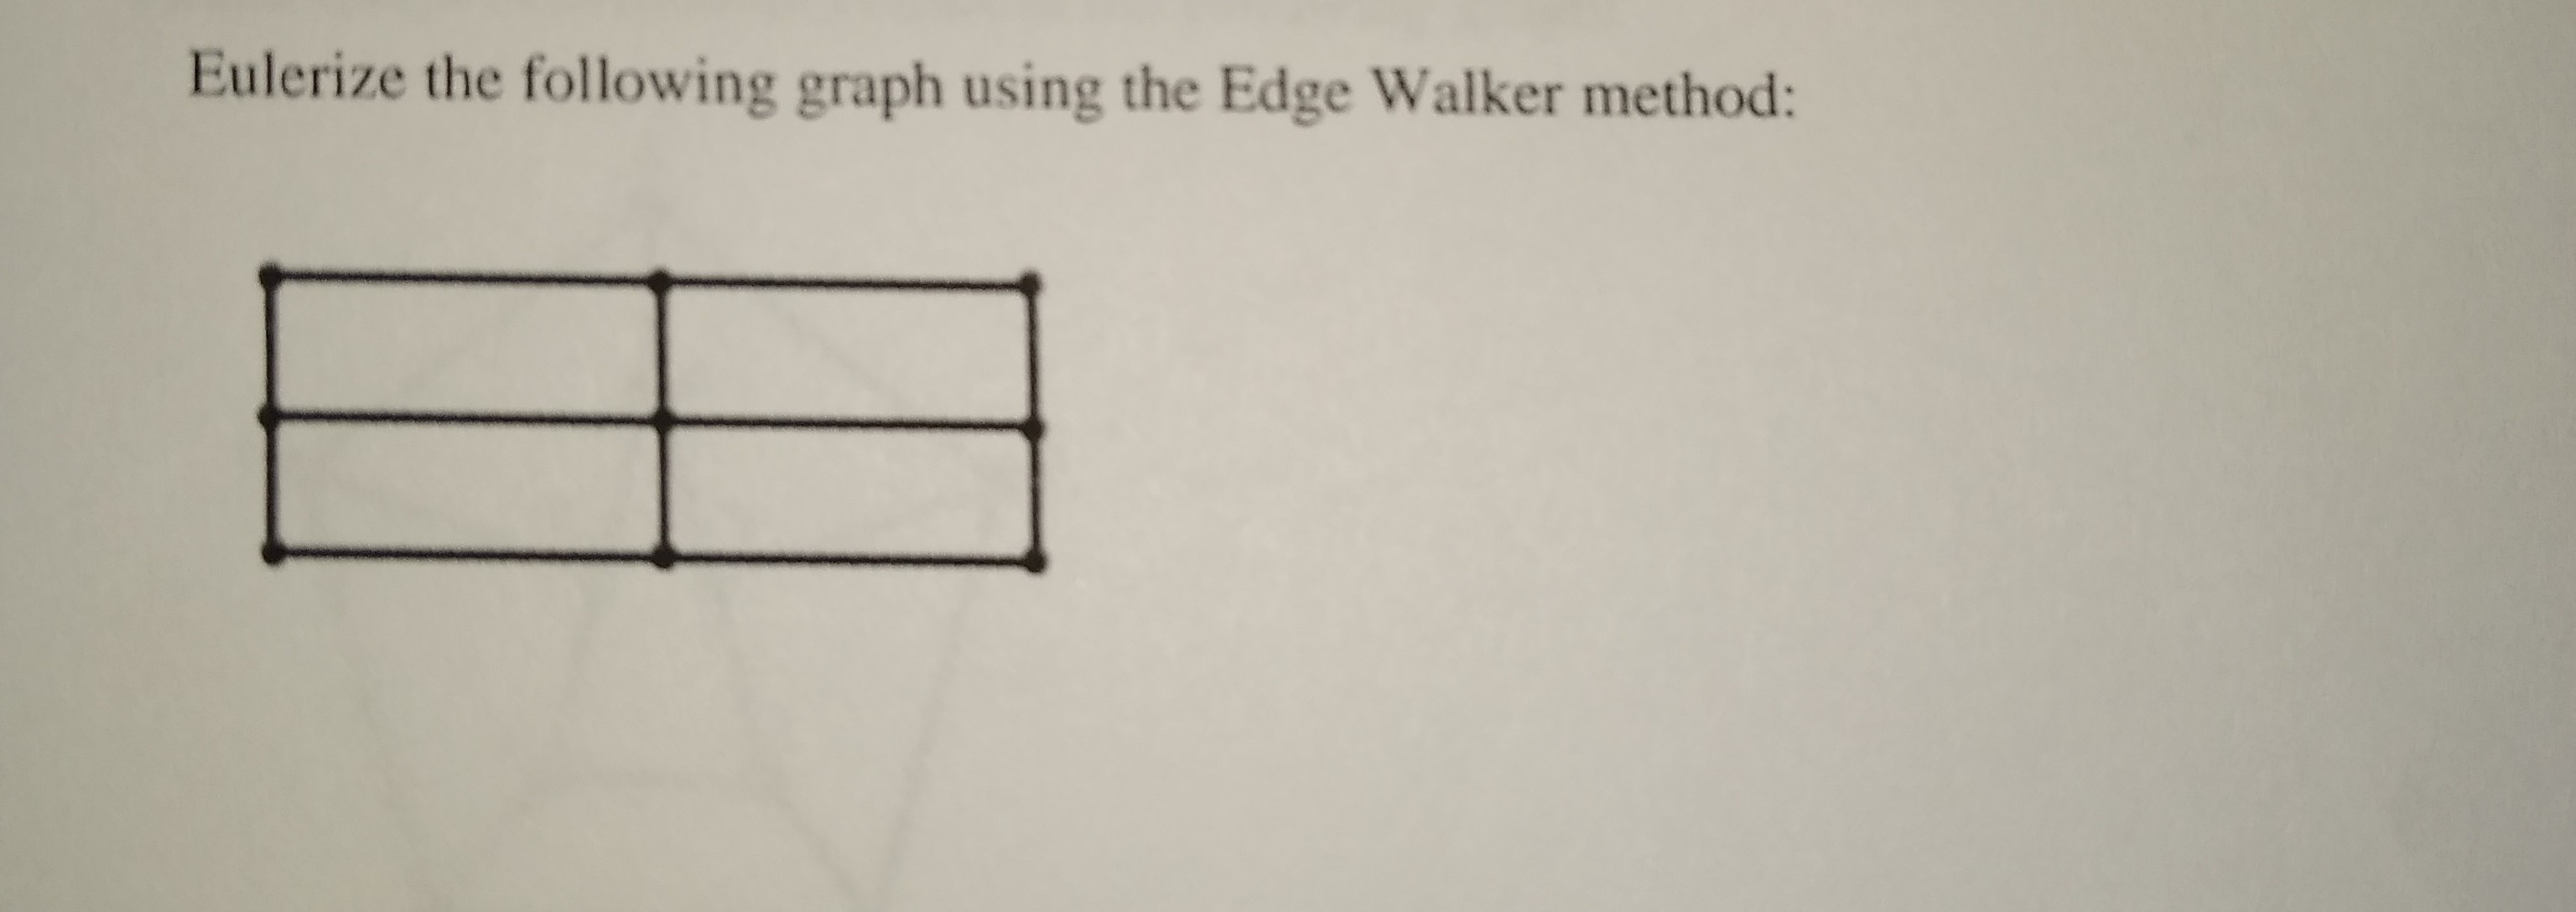 Eulerize the following graph using the Edge Walker method:
